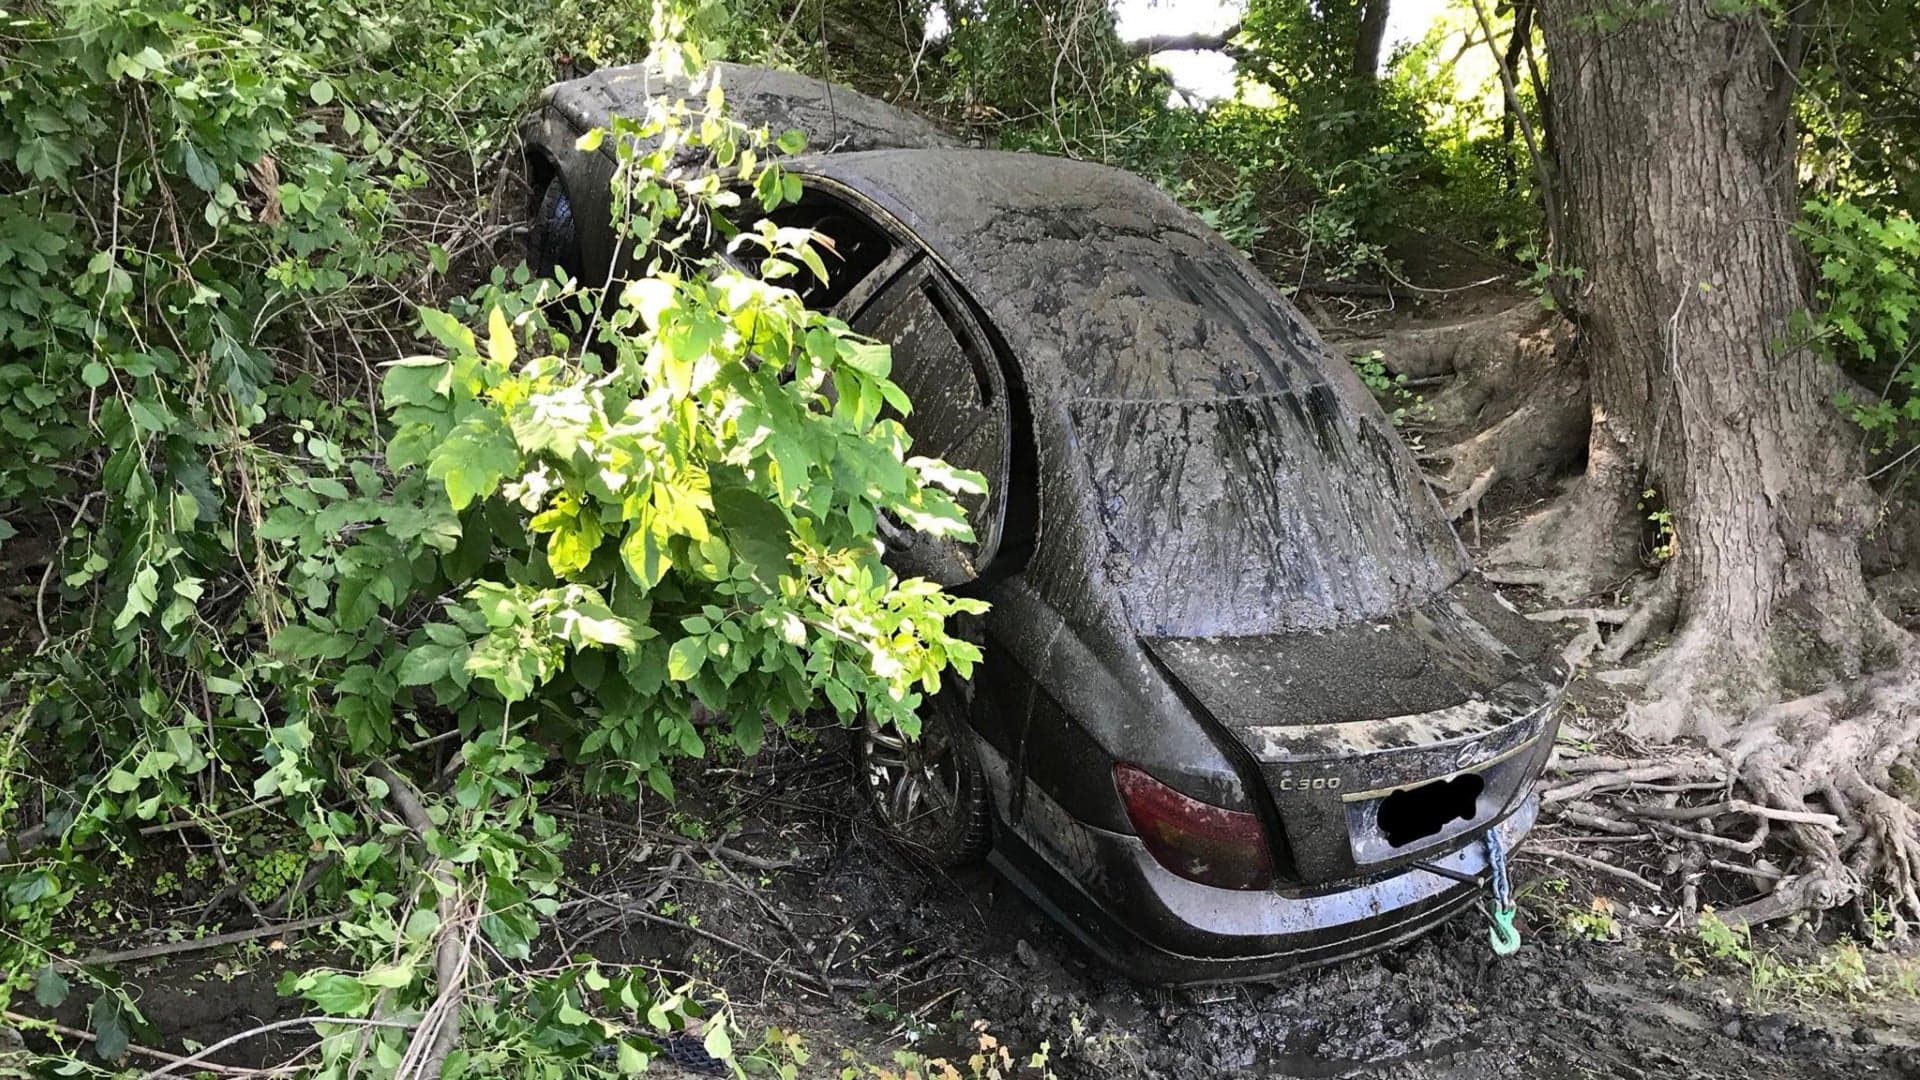 Car Abandoned in River Found by Kayaker 3 Months Later